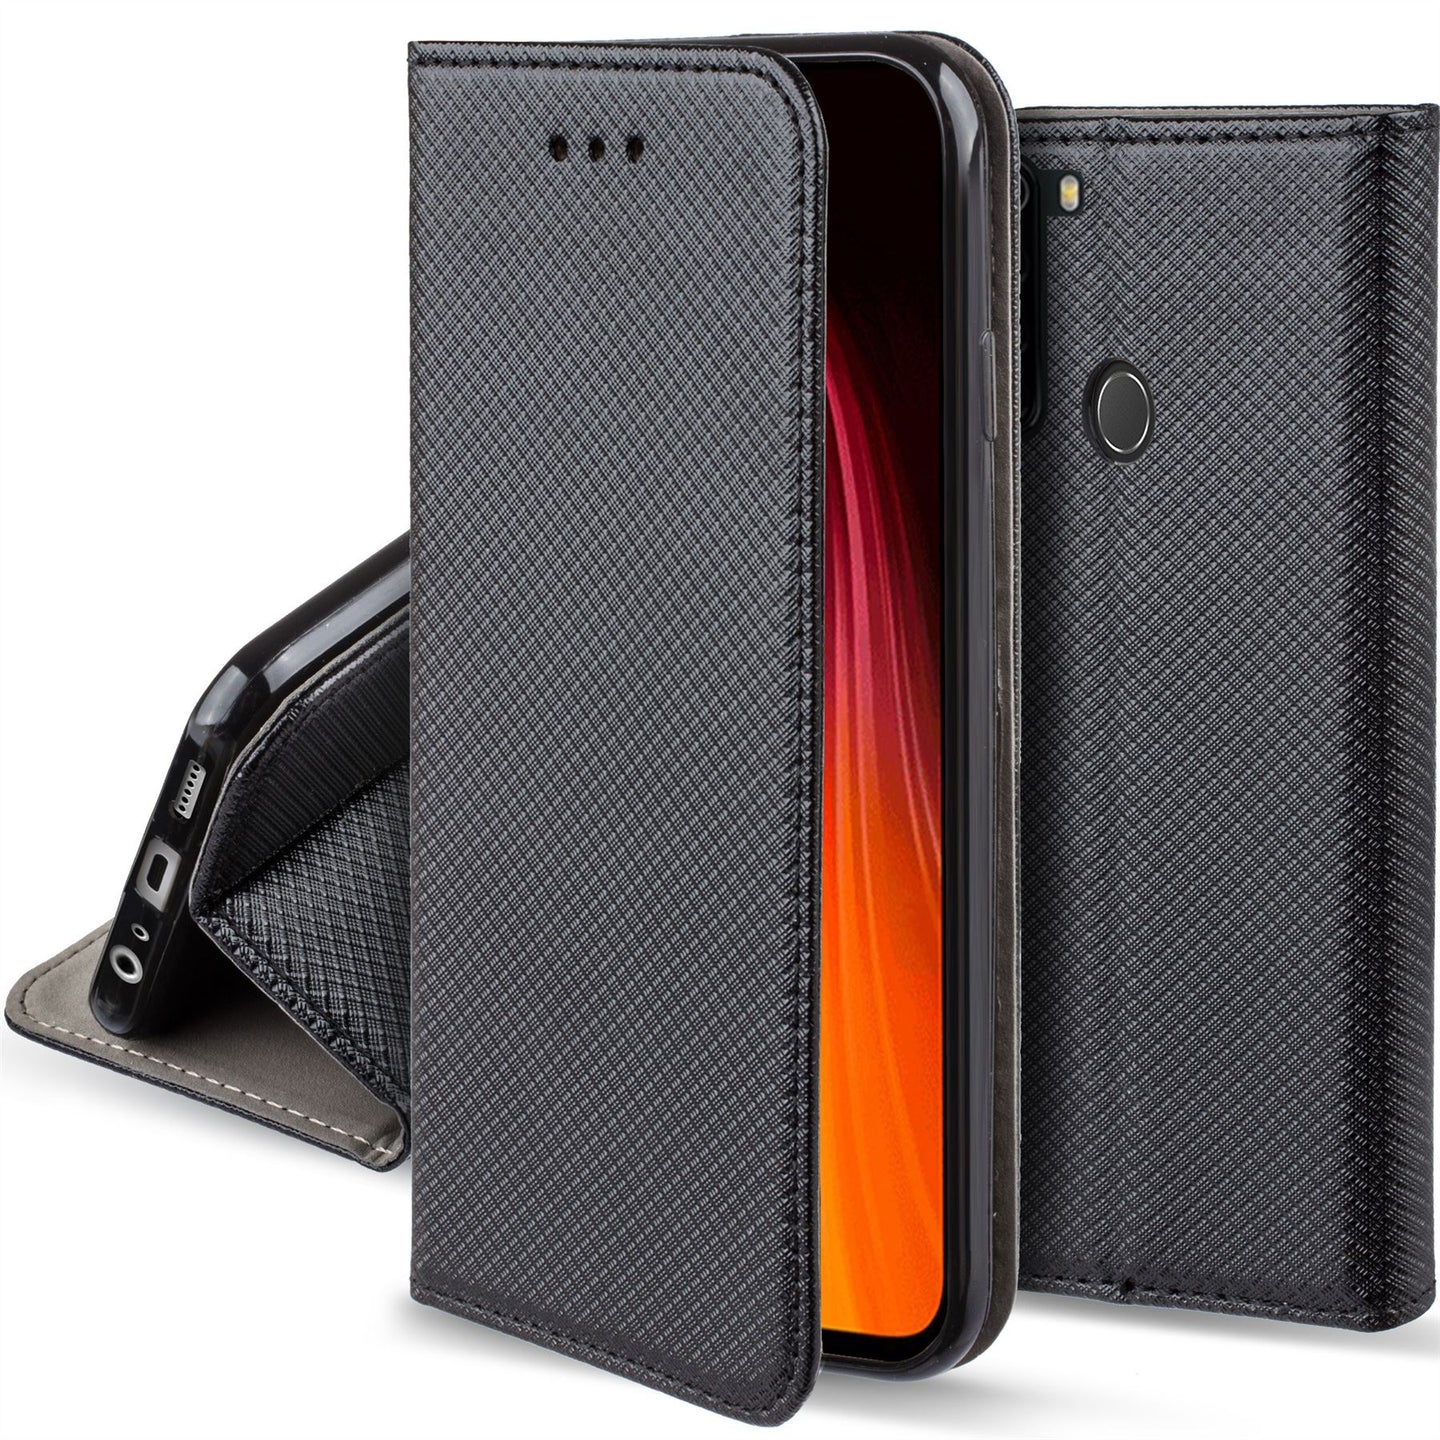 Moozy Case Flip Cover for Xiaomi Redmi Note 8, Black - Smart Magnetic Flip Case with Card Holder and Stand